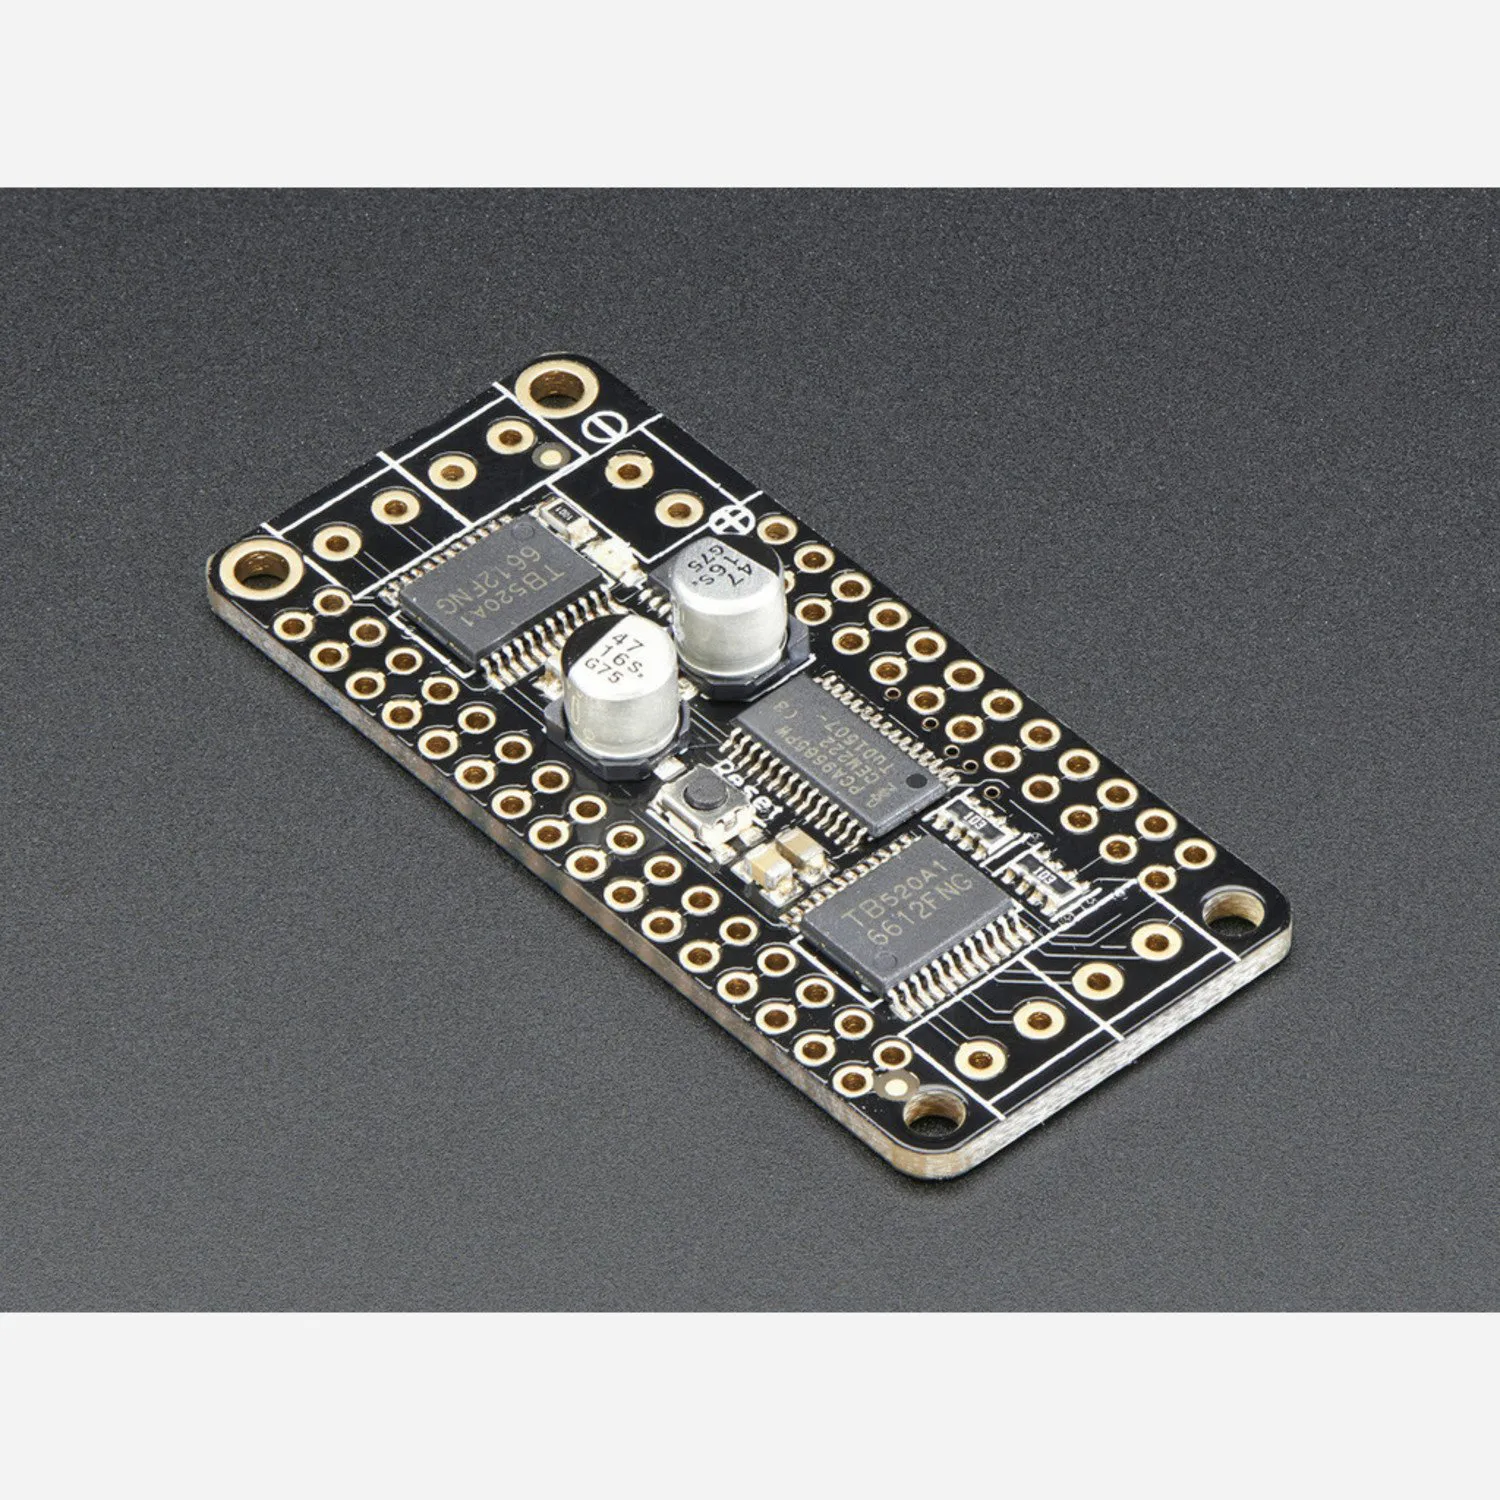 Photo of DC Motor + Stepper FeatherWing Add-on For All Feather Boards